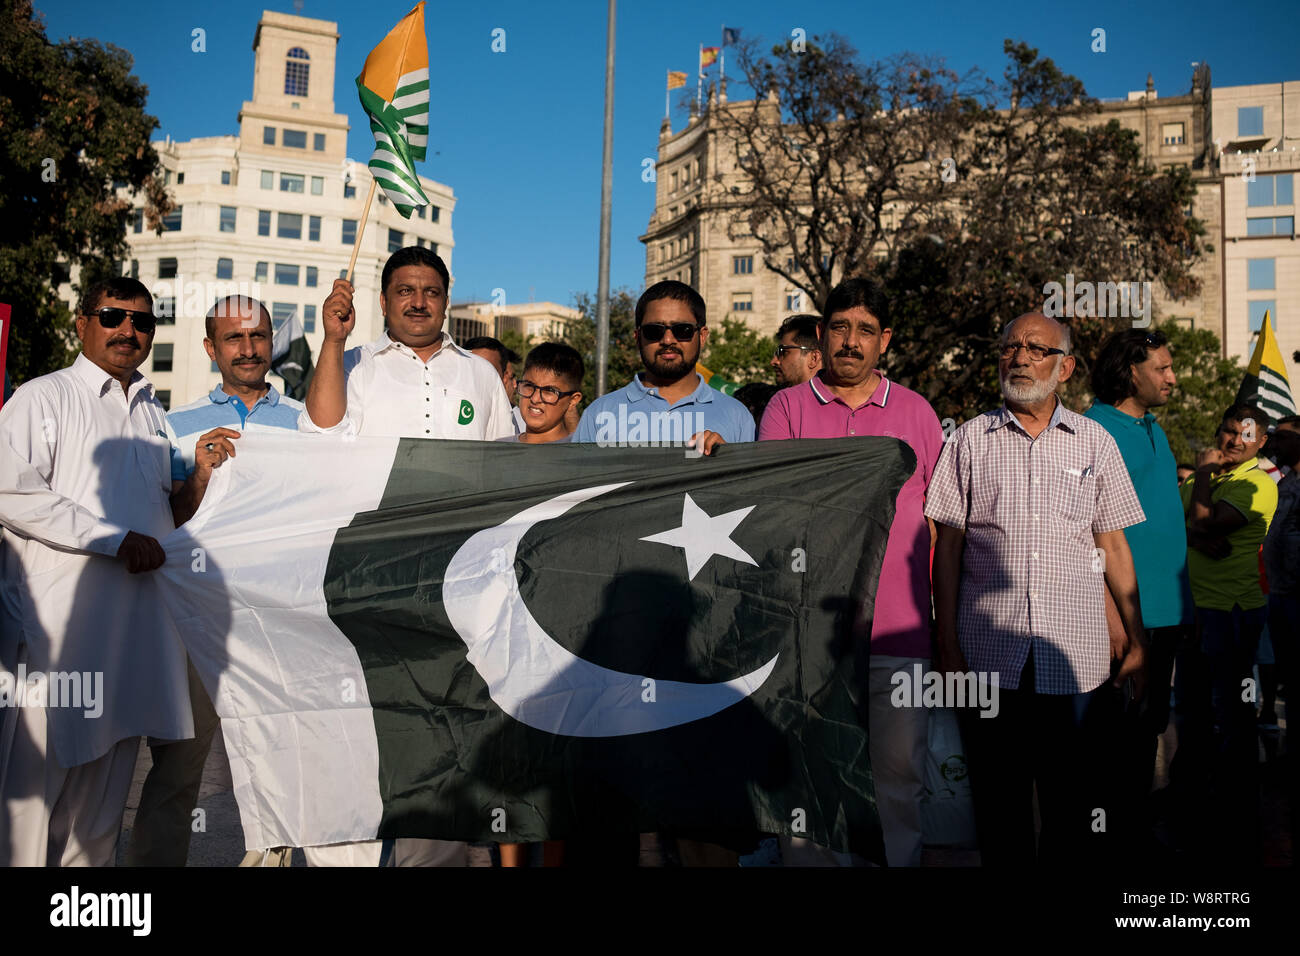 Barcelona, Spain - 10 august 2019: Kashmir and pakistani nationals protest and demonstrate against indian revoke of autonomous region status with bann Stock Photo